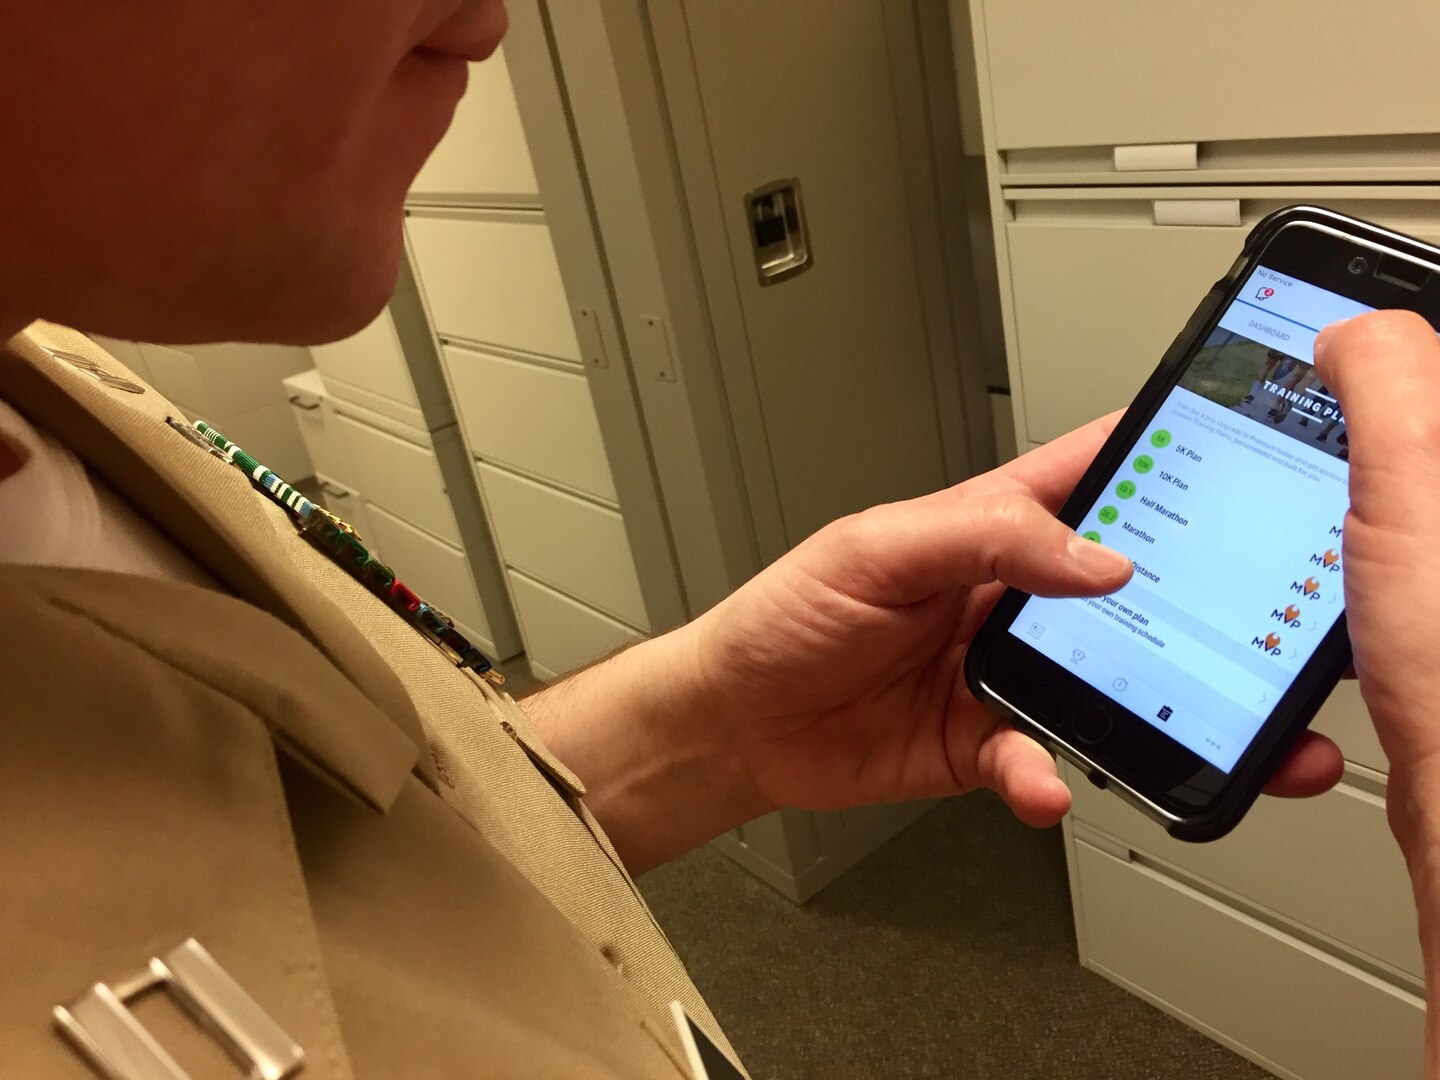 A service member looks at a fitness app on his smartphone at the Pentagon, Feb. 1, 2018. The Defense Department is concerned about a “possible vulnerability” of the use of GPS-enabled electronic devices after a Strava heat map showed the routes of exercise enthusiasts who used the app to track their fitness activities, including at military installations worldwide.